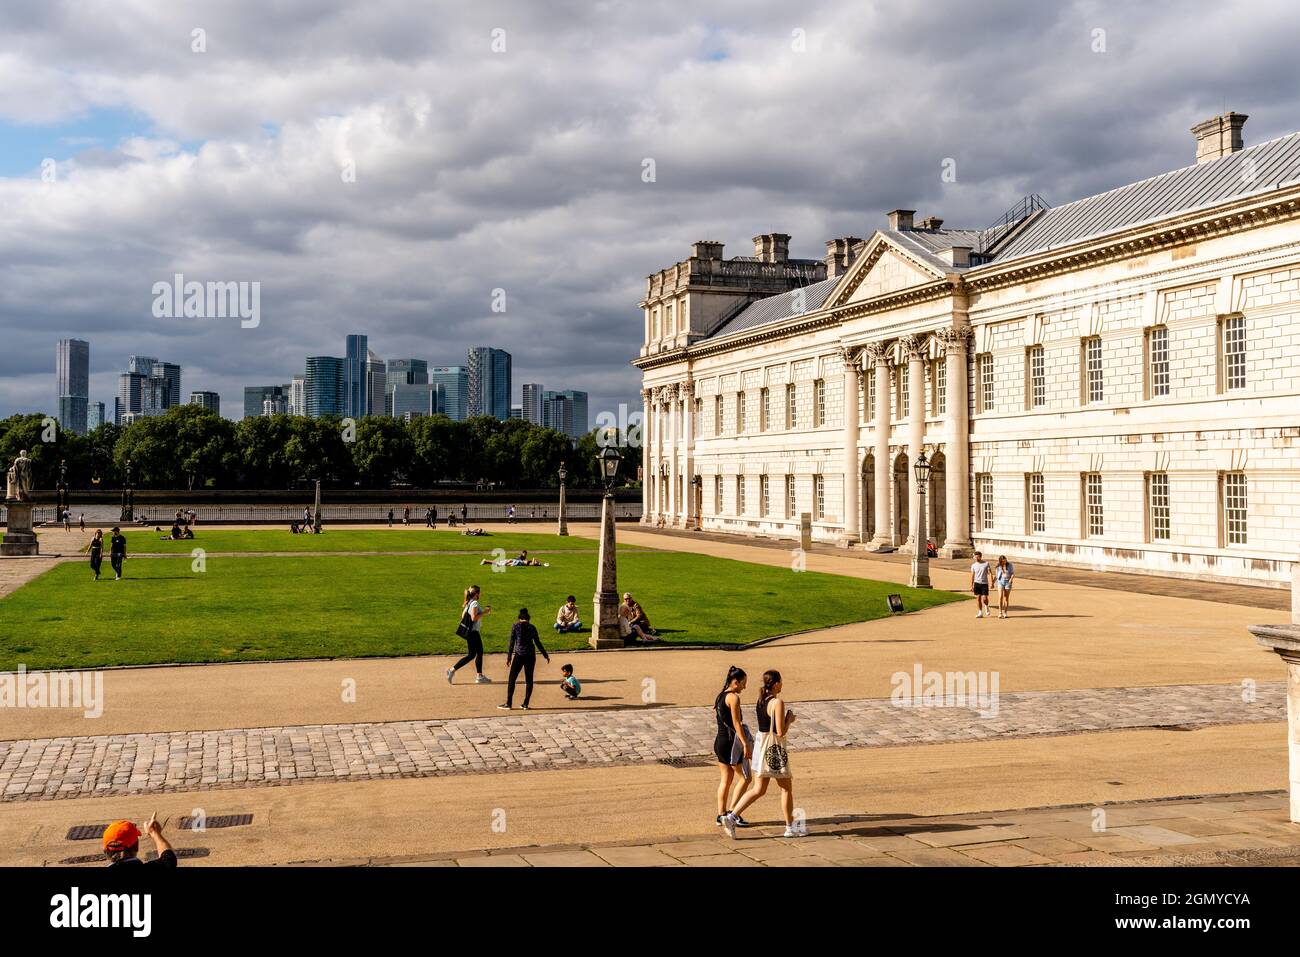 The Old Royal Navy College With Canary Wharf In The Backround, Greenwich, London, UK. Stock Photo